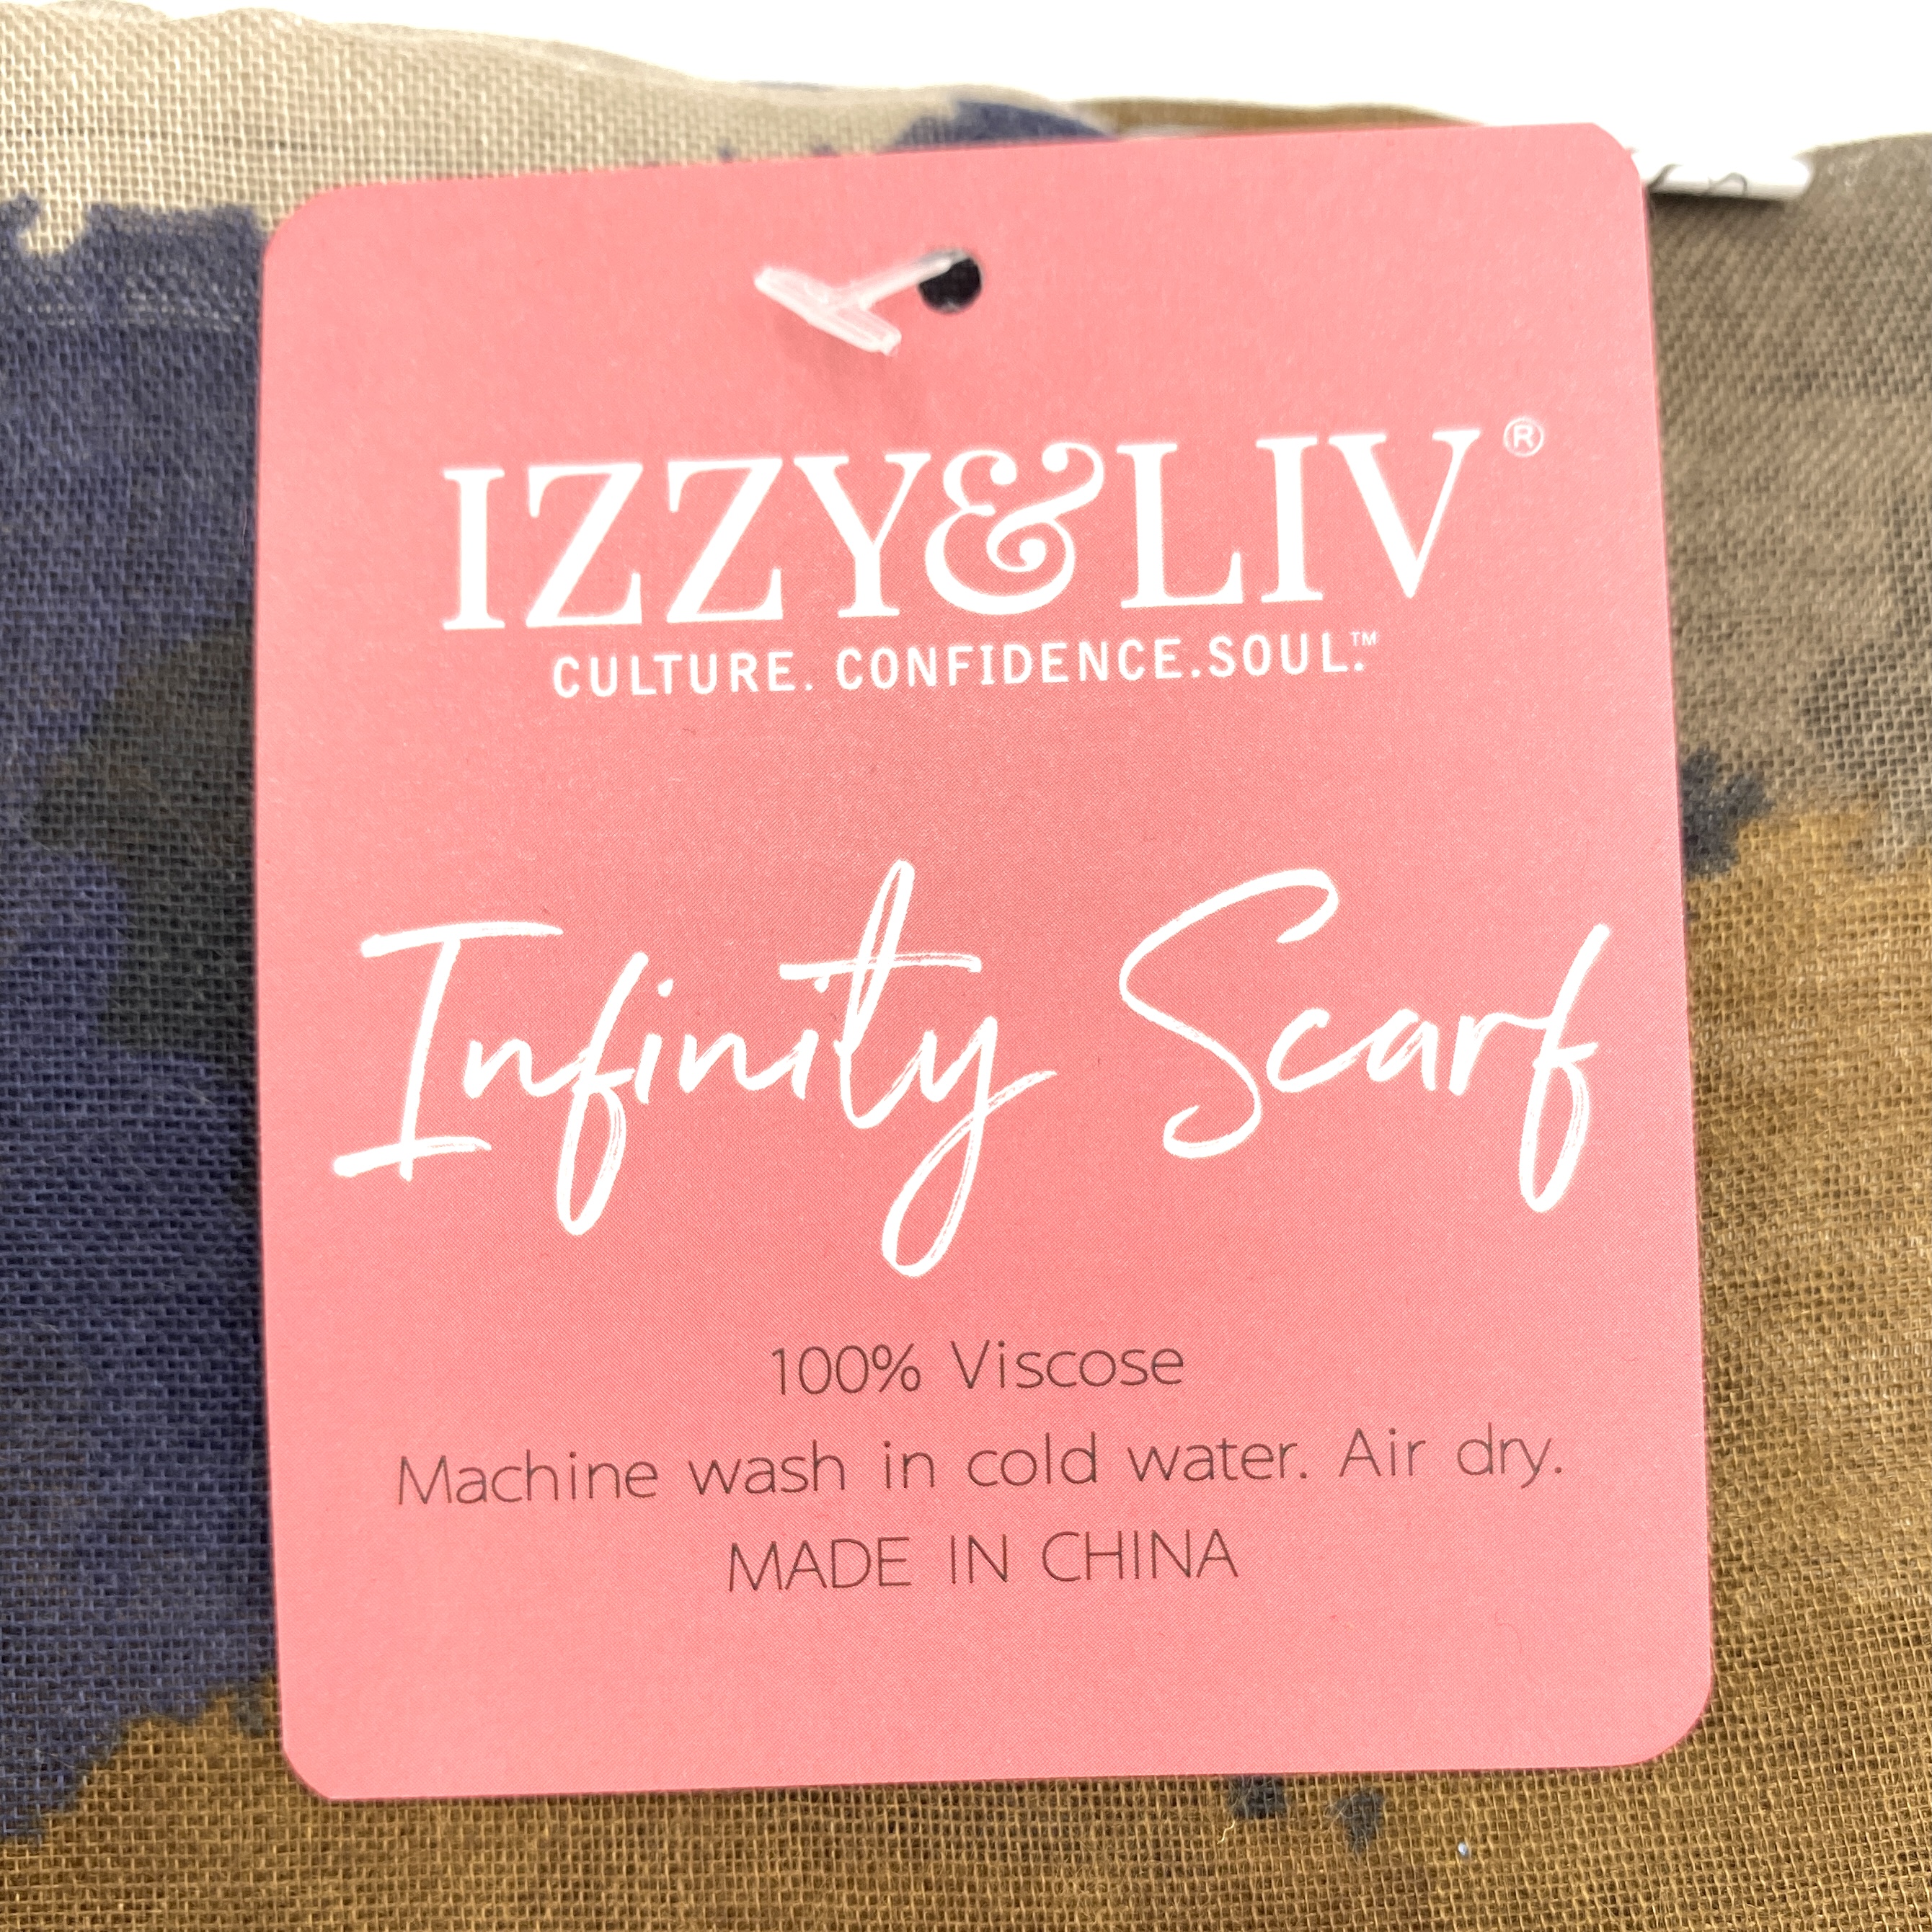 Layered Up Infinity Scarf Info for Brown Sugar Box December 2020